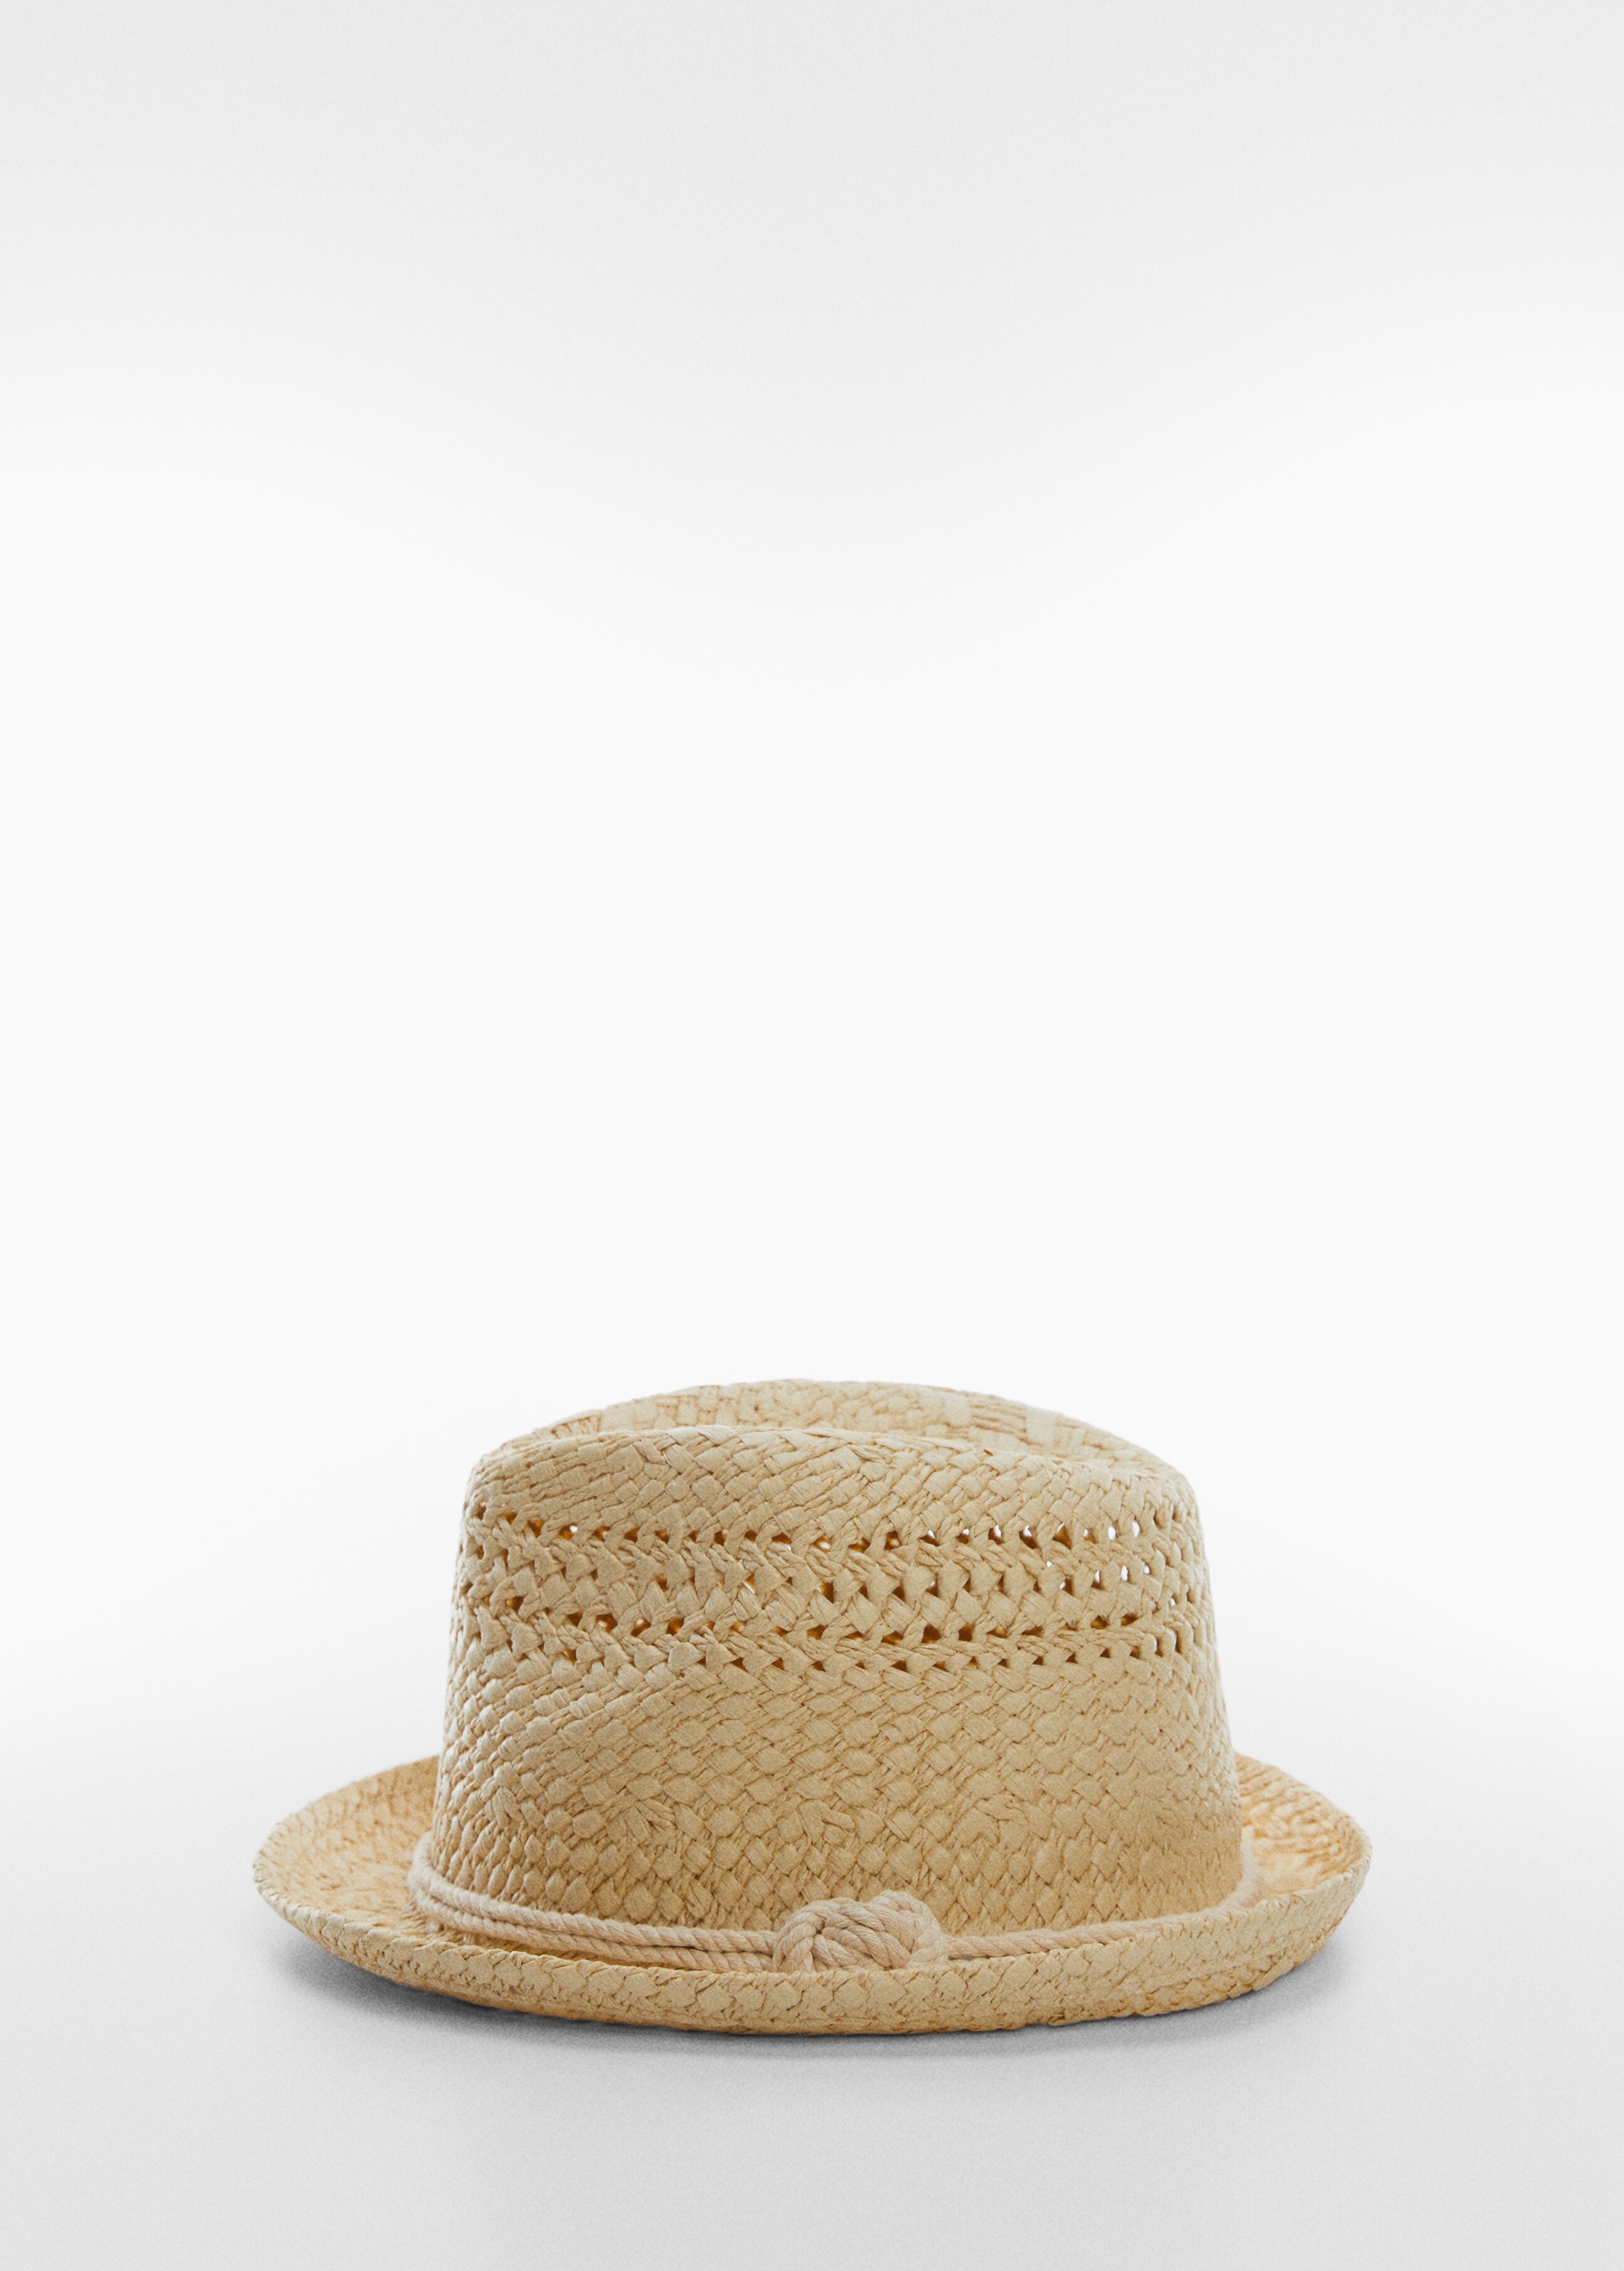 Shells straw hat - Article without model